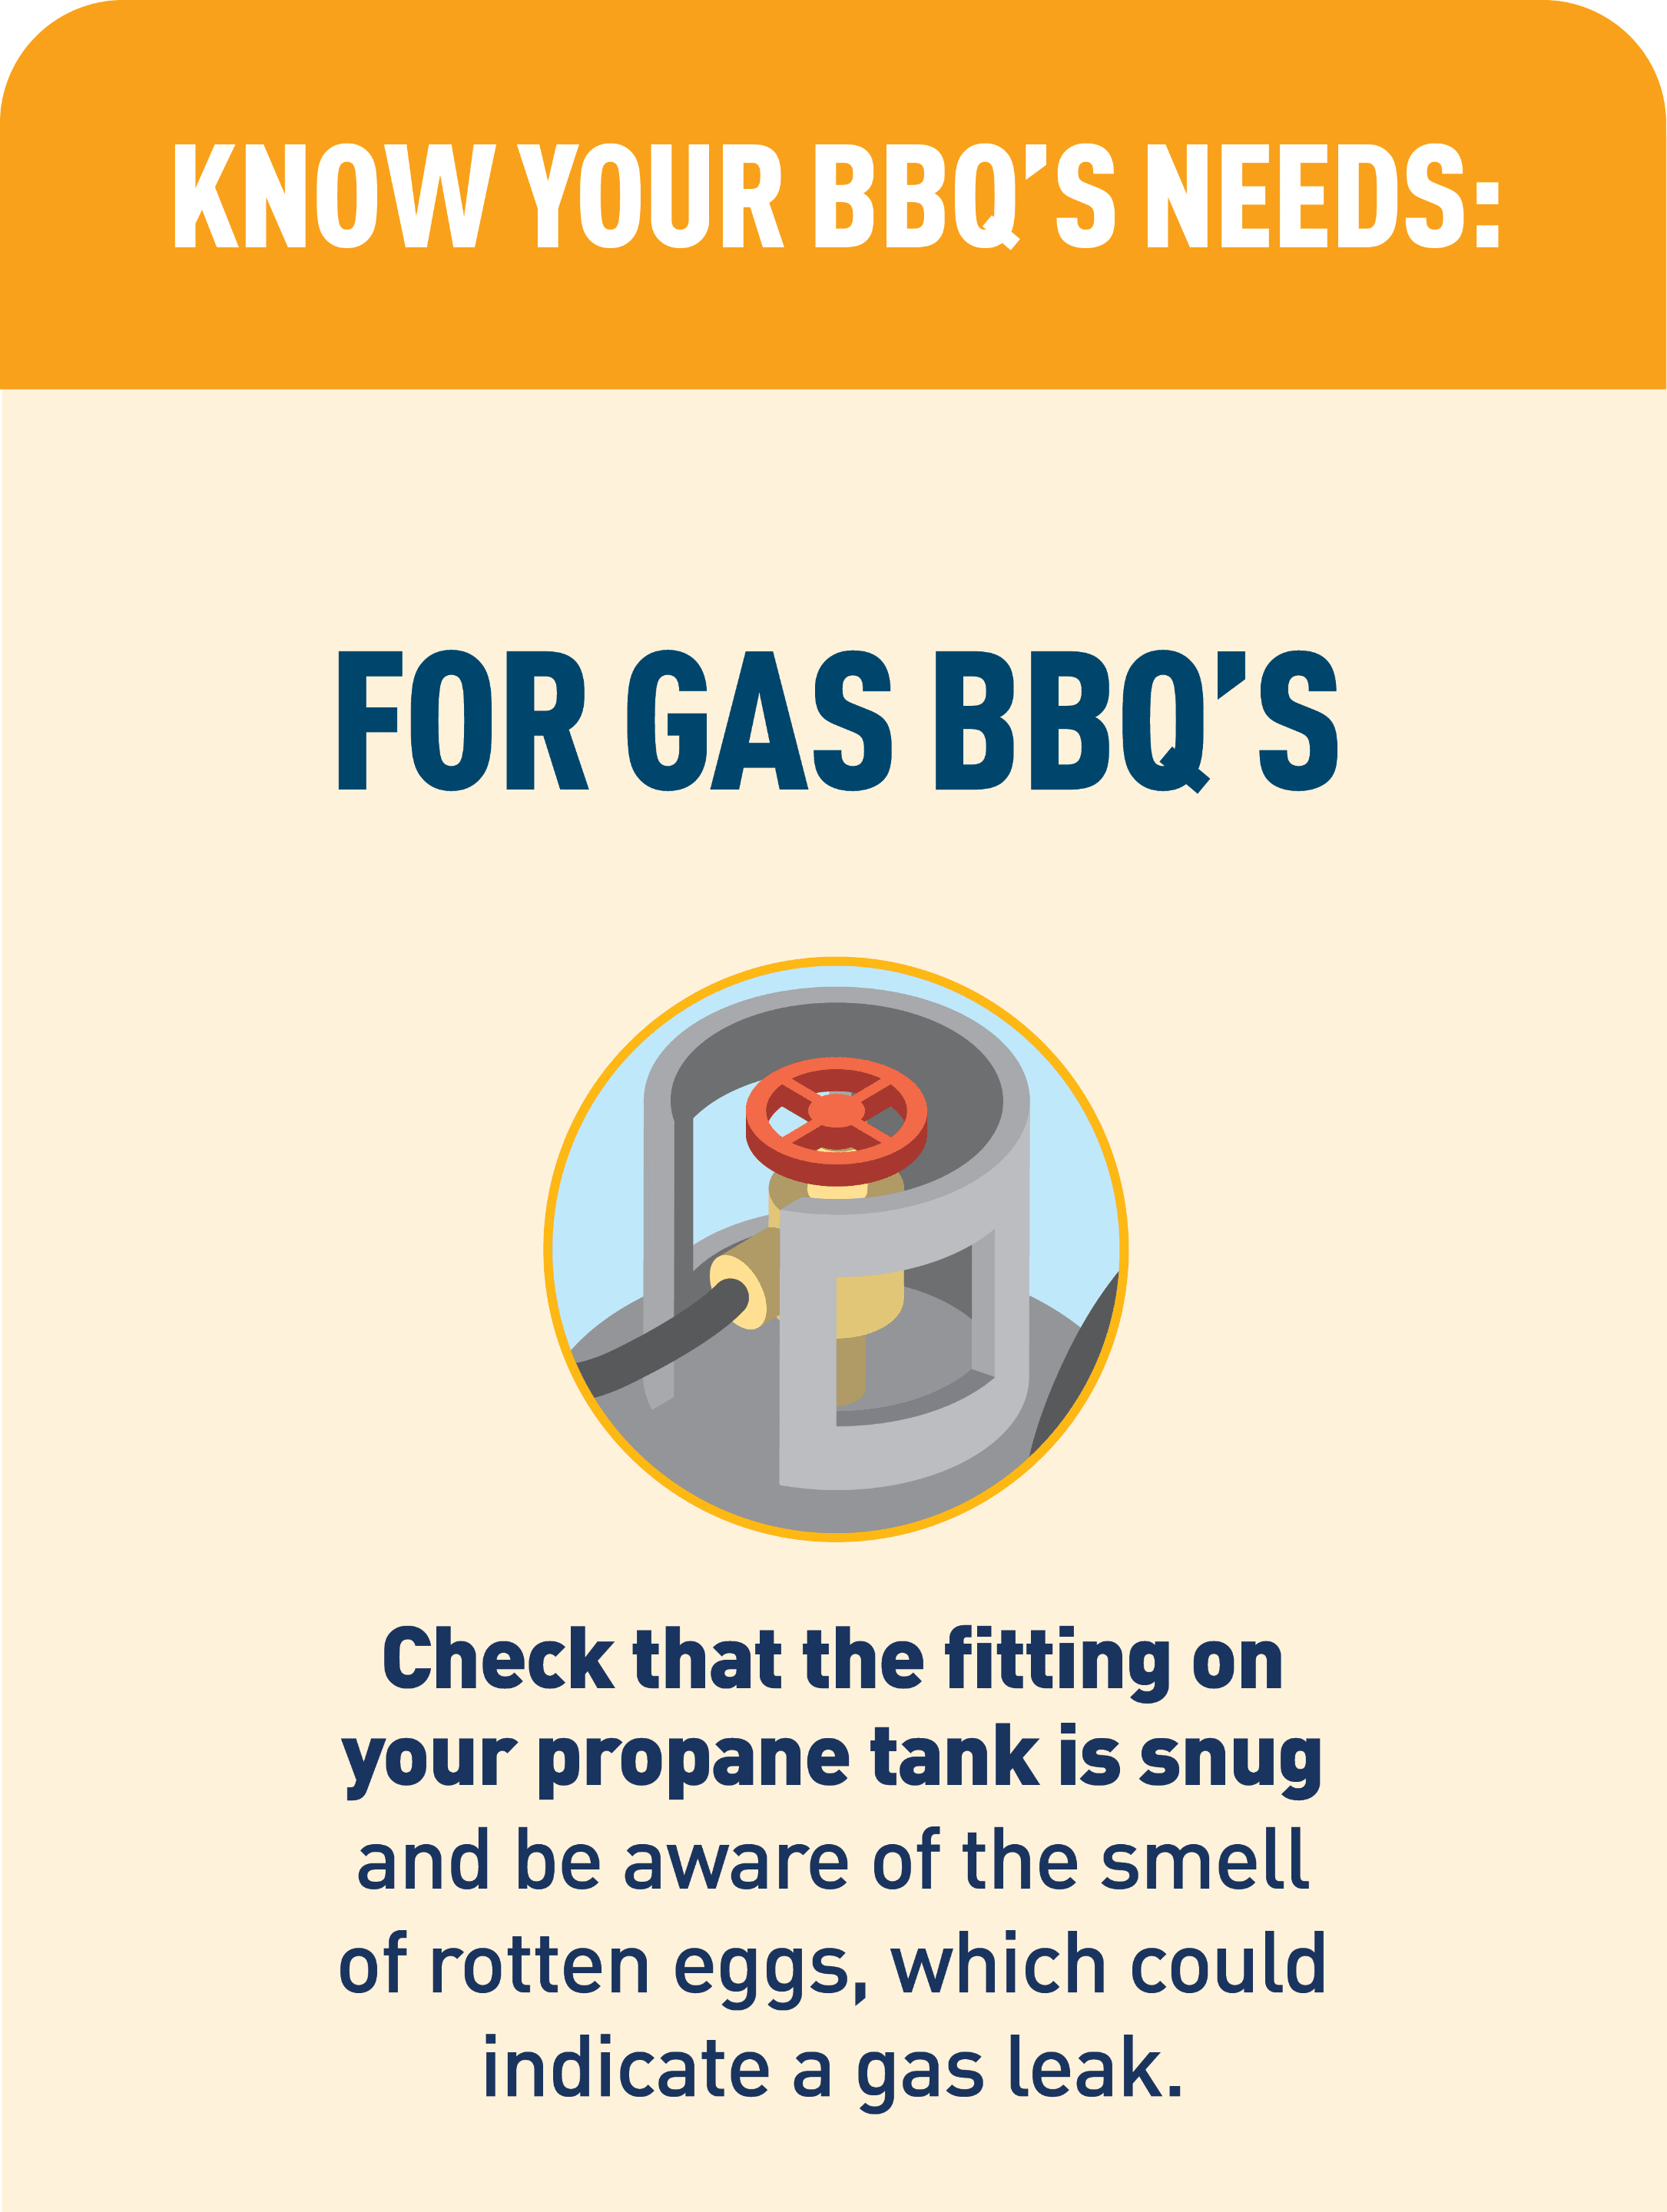 Image Description: Graphic of propane tank valve. Text: FOR GAS BBQ'S. Check that the fitting on your propane tank is snug and be aware of the smell of rotten eggs, which could indicate a gas leak.